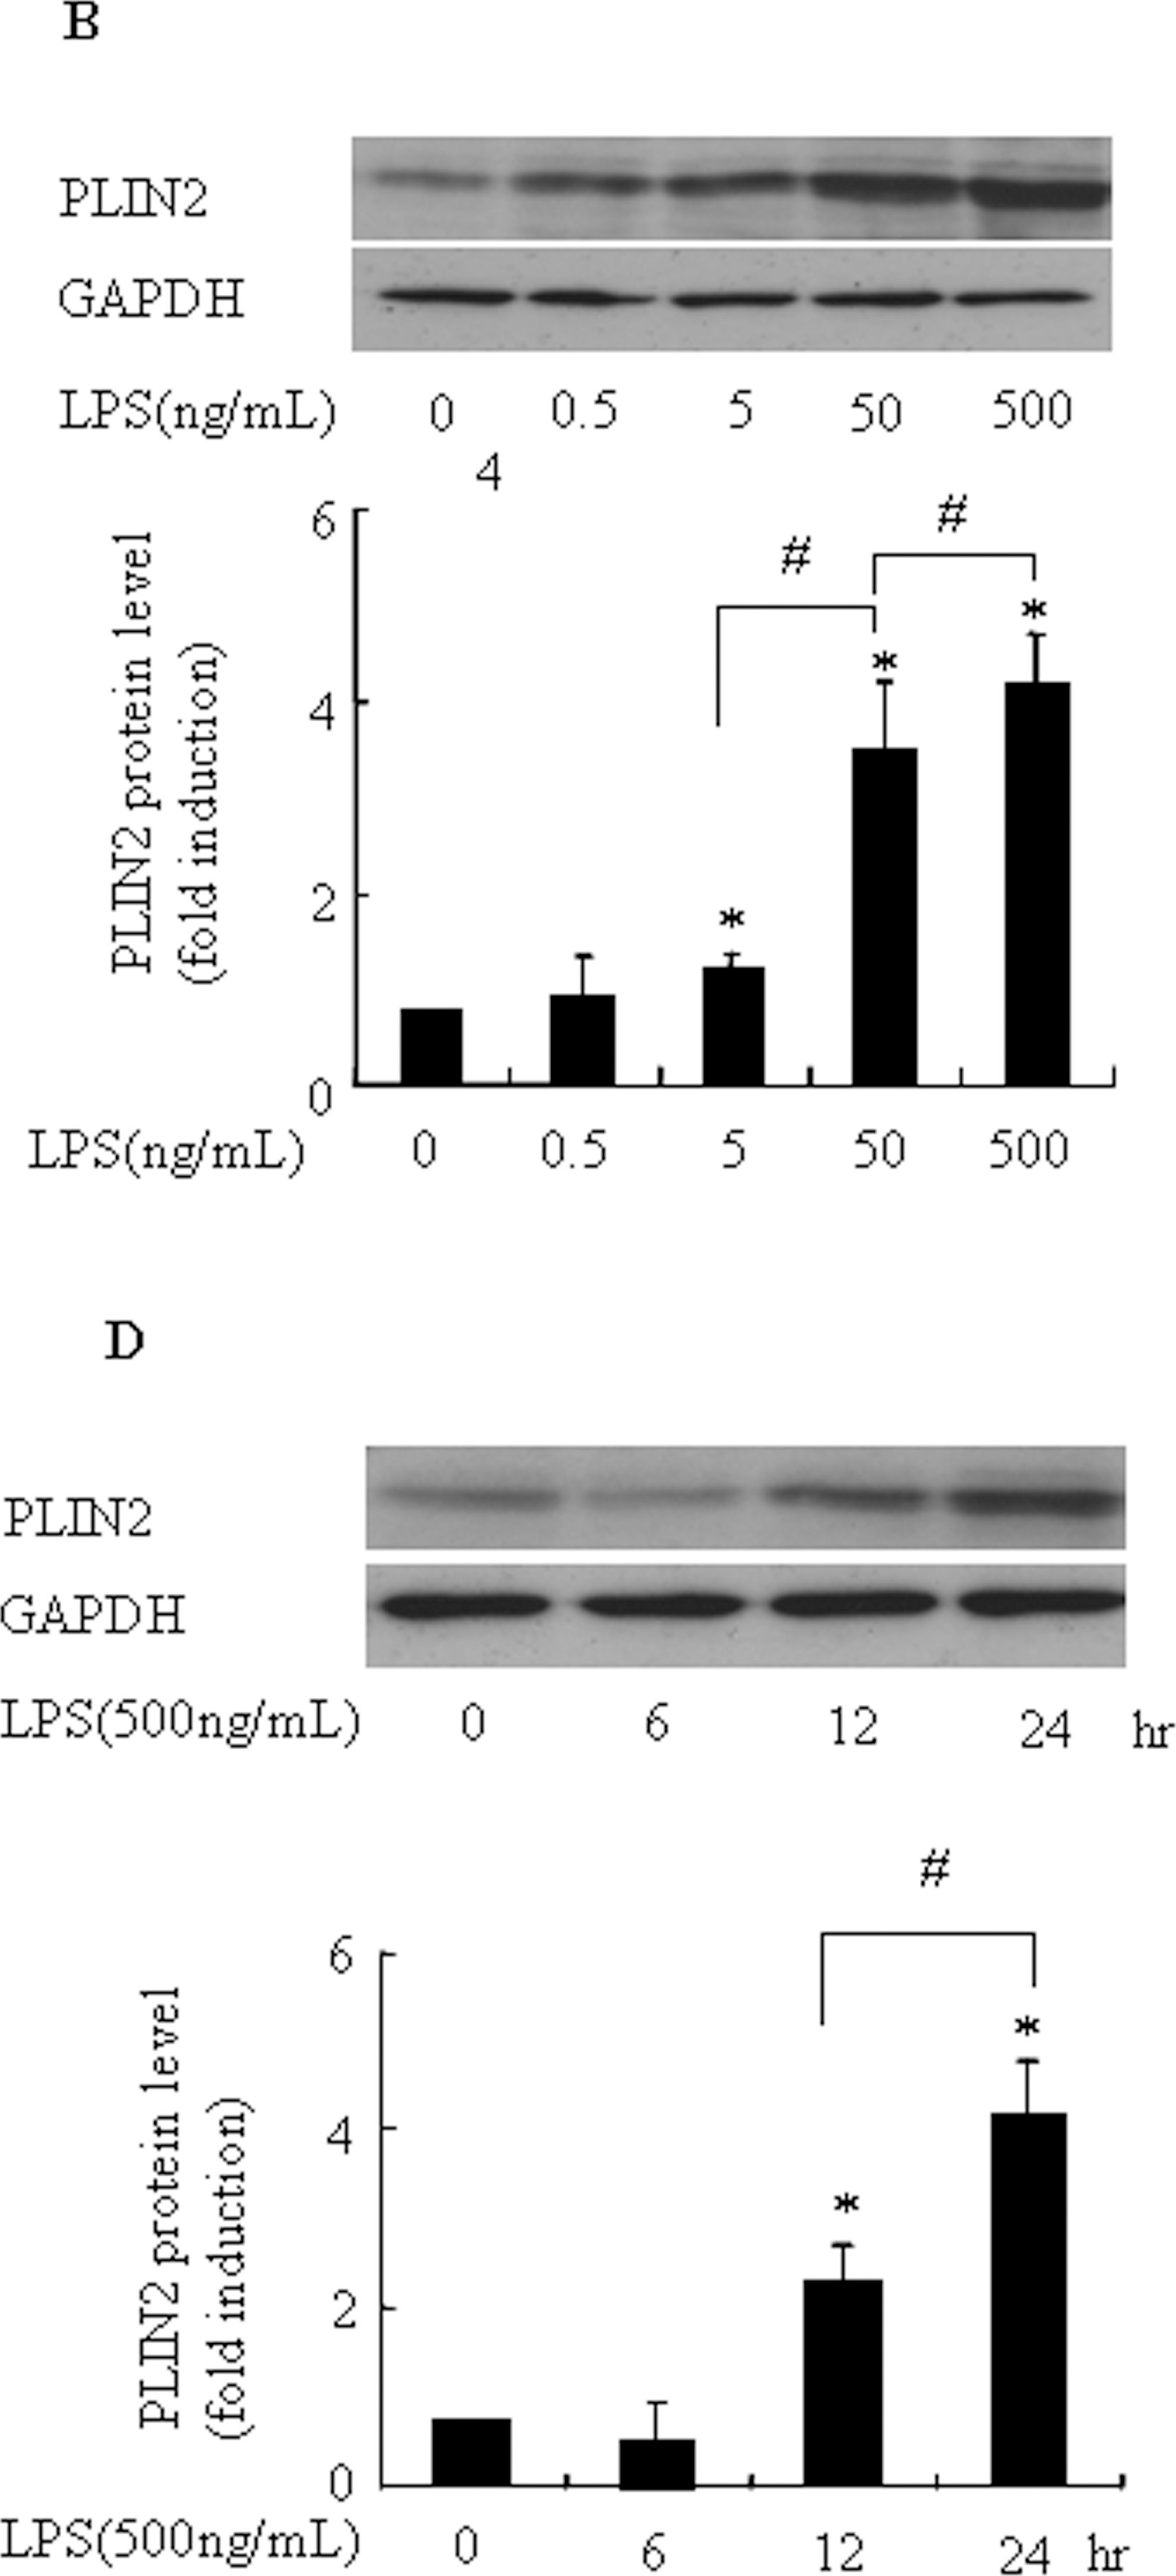 Pycnogenol Attenuates the Release of Proinflammatory Cytokines and Expression of Perilipin 2 in Lipopolysaccharide-Stimulated Microglia in Part via Inhibition of NF-κB and AP-1 Activation.